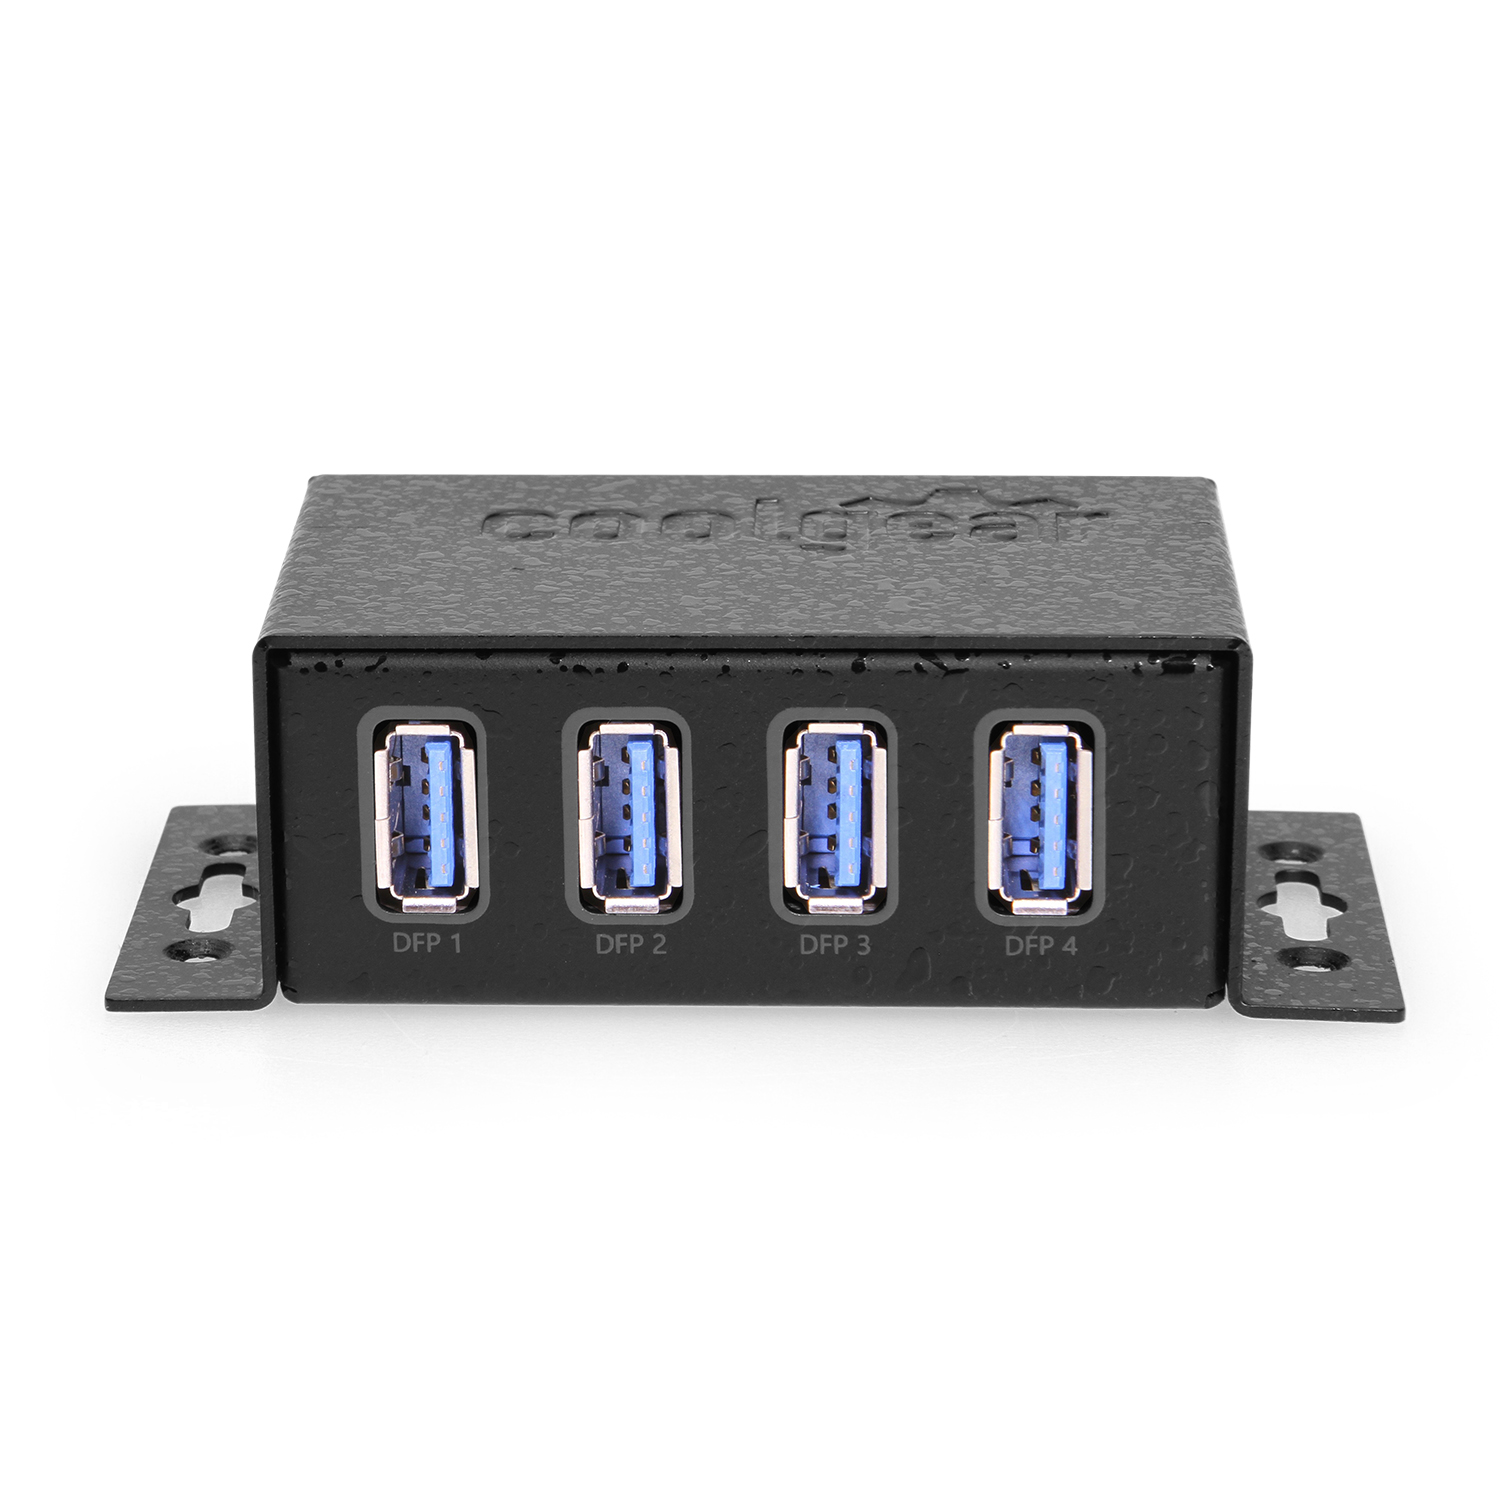 12V 6A Power Supply for 3 Pin USB Hub Power B Configuration - Coolgear